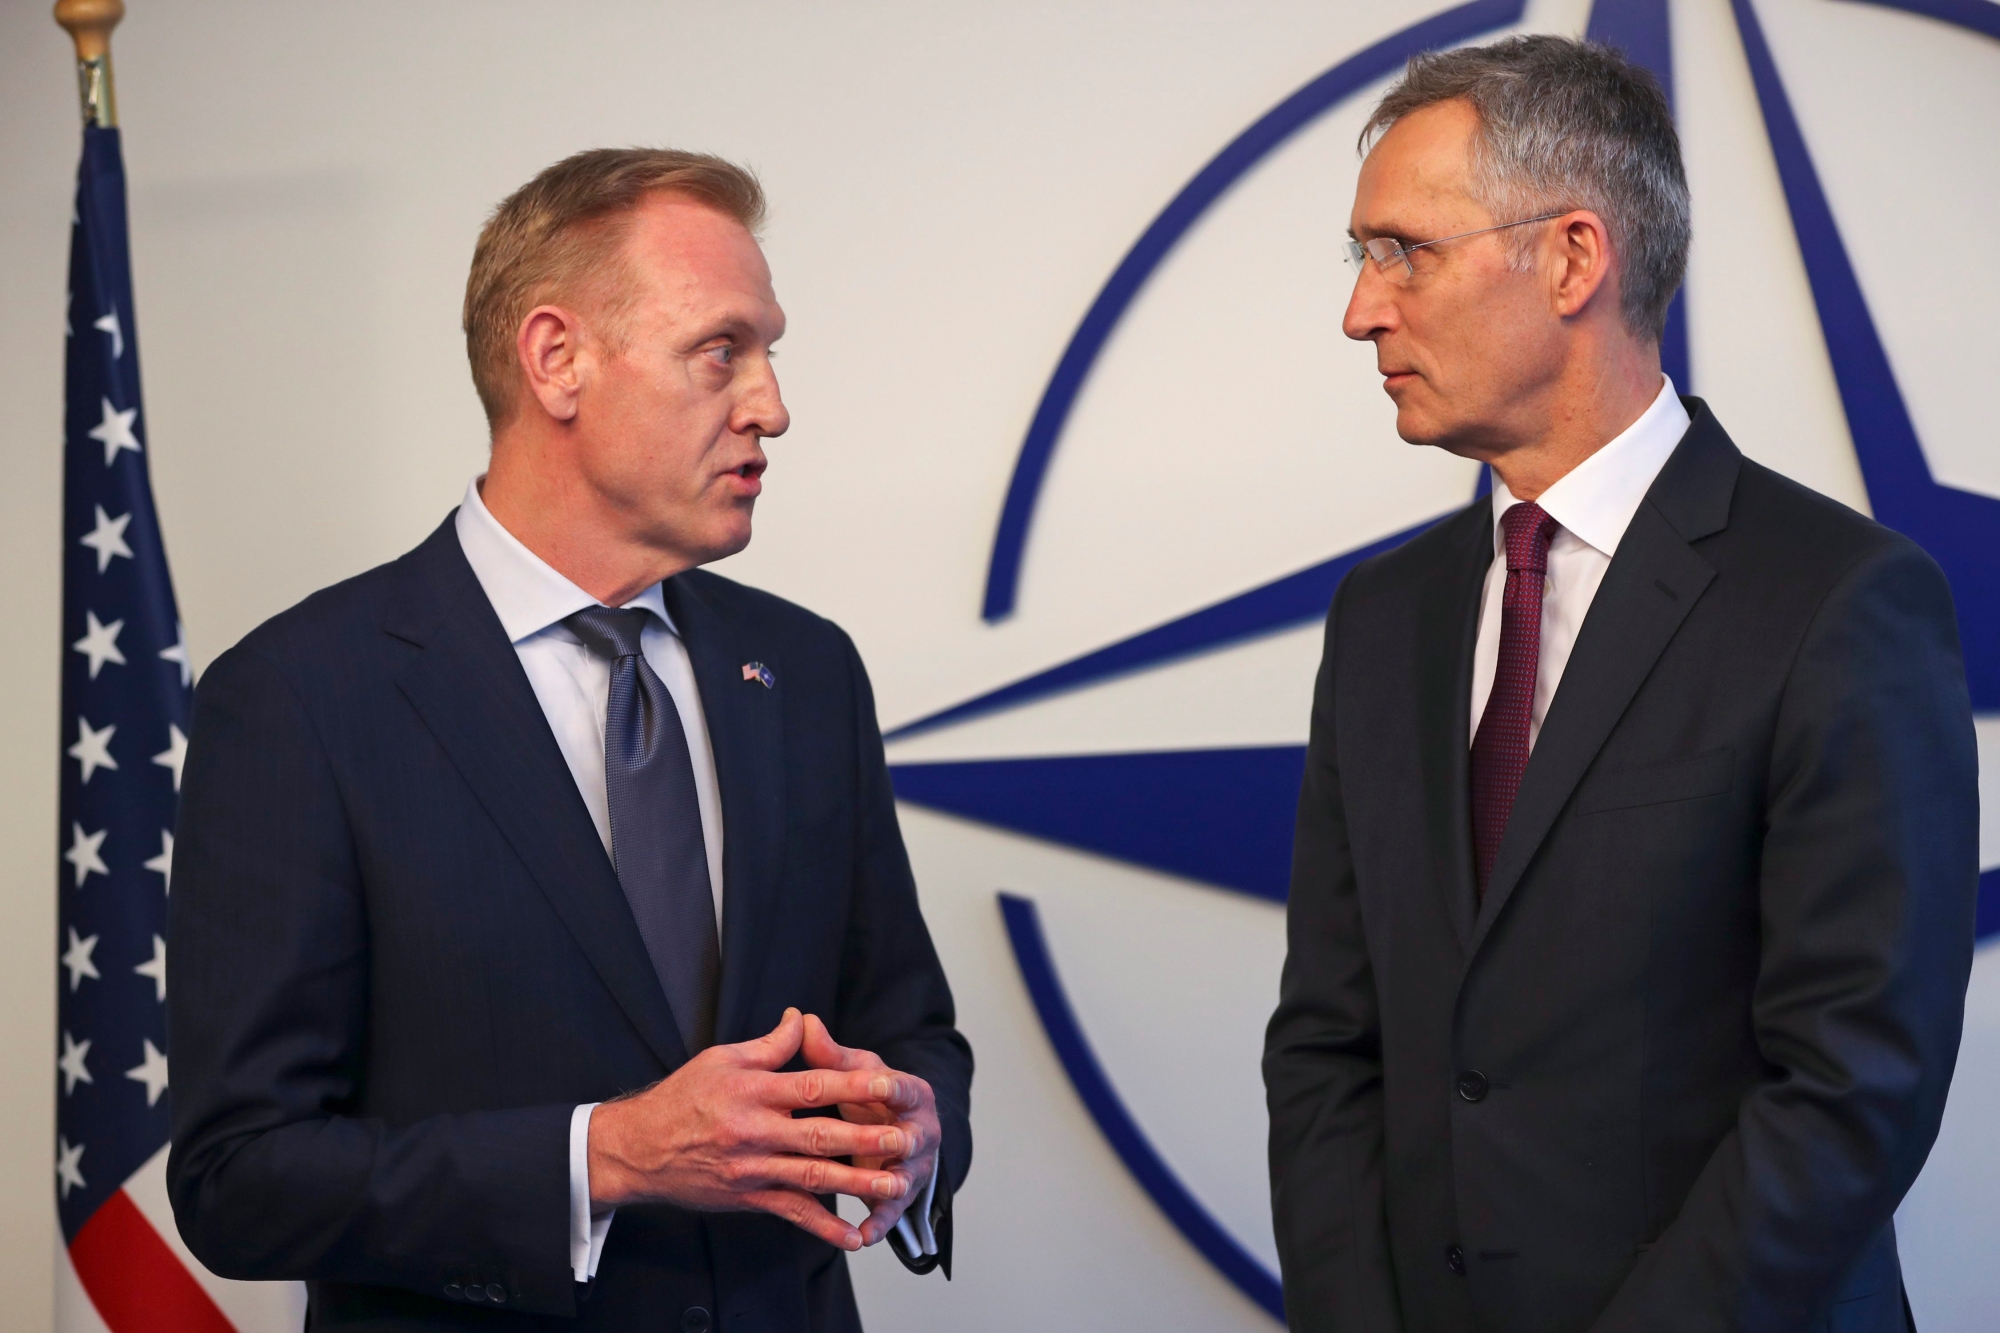 epa07367240 Acting US Defence Secretary Patrick Shanahan (L)  talks to NATO's Secretary General Jens Stoltenberg for the media during a meeting of NATO defence ministers at NATO headquarters in Brussels, Belgium, 13 February 2019.  EPA/Francisco Seco BELGIUM NATO DEFENSE MINISTERS COUNCIL